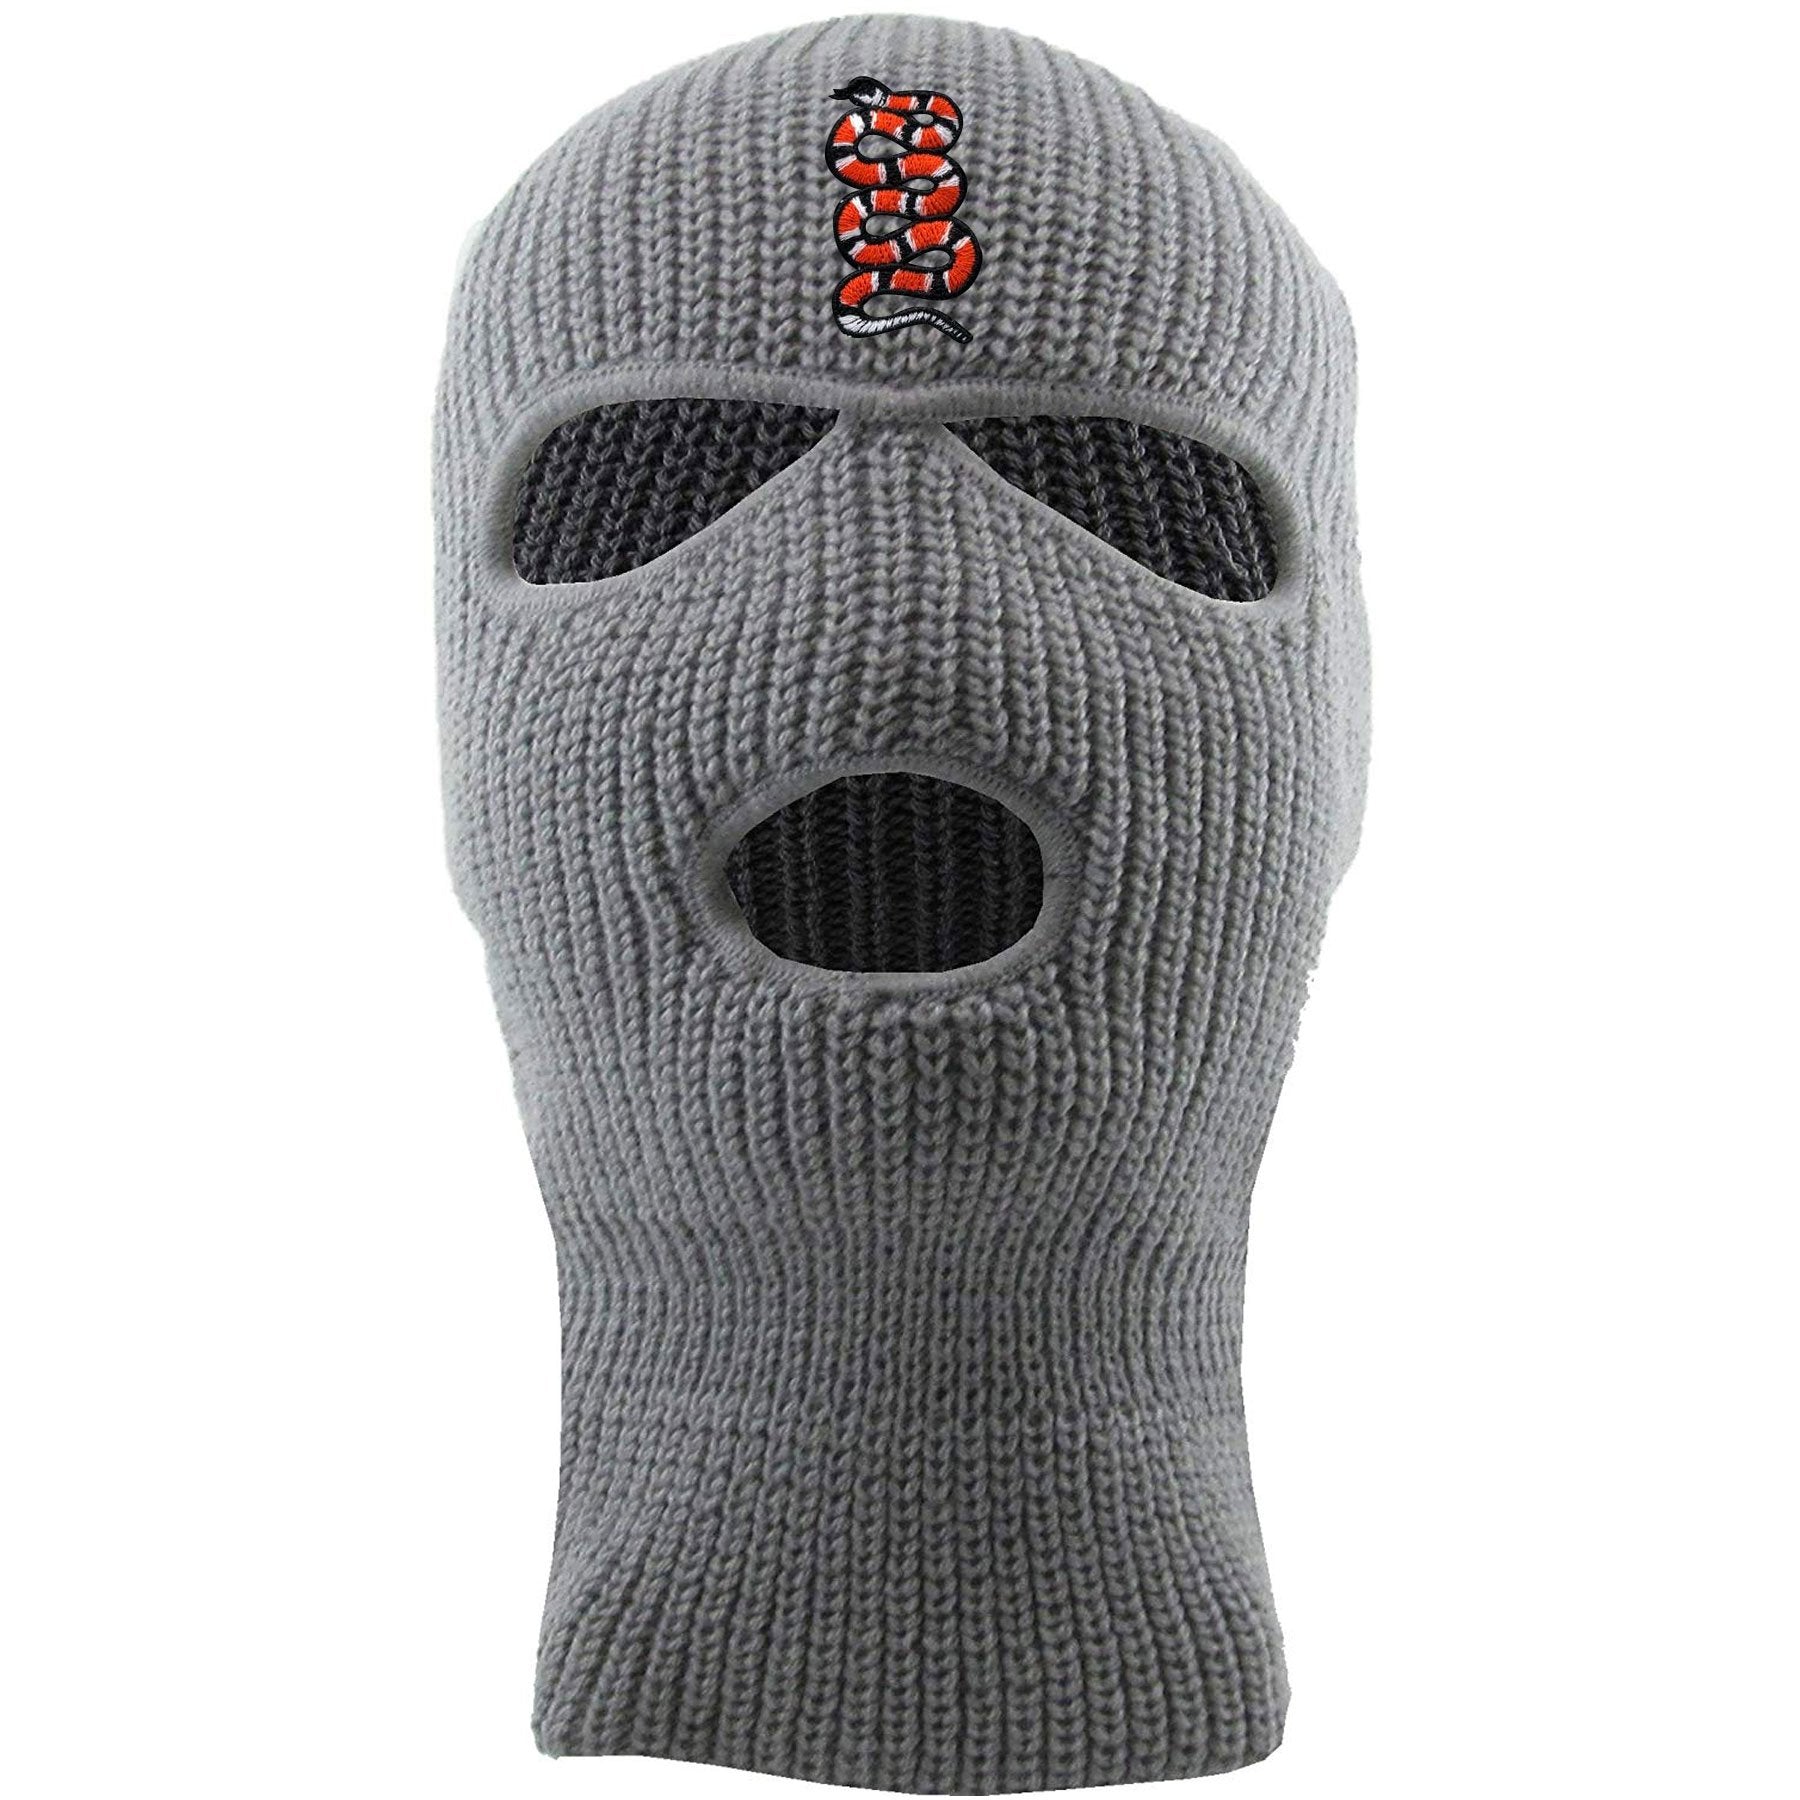 Embroidered on the forehead of the light gray coiled snake ski mask is the snake logo in red, white, and black